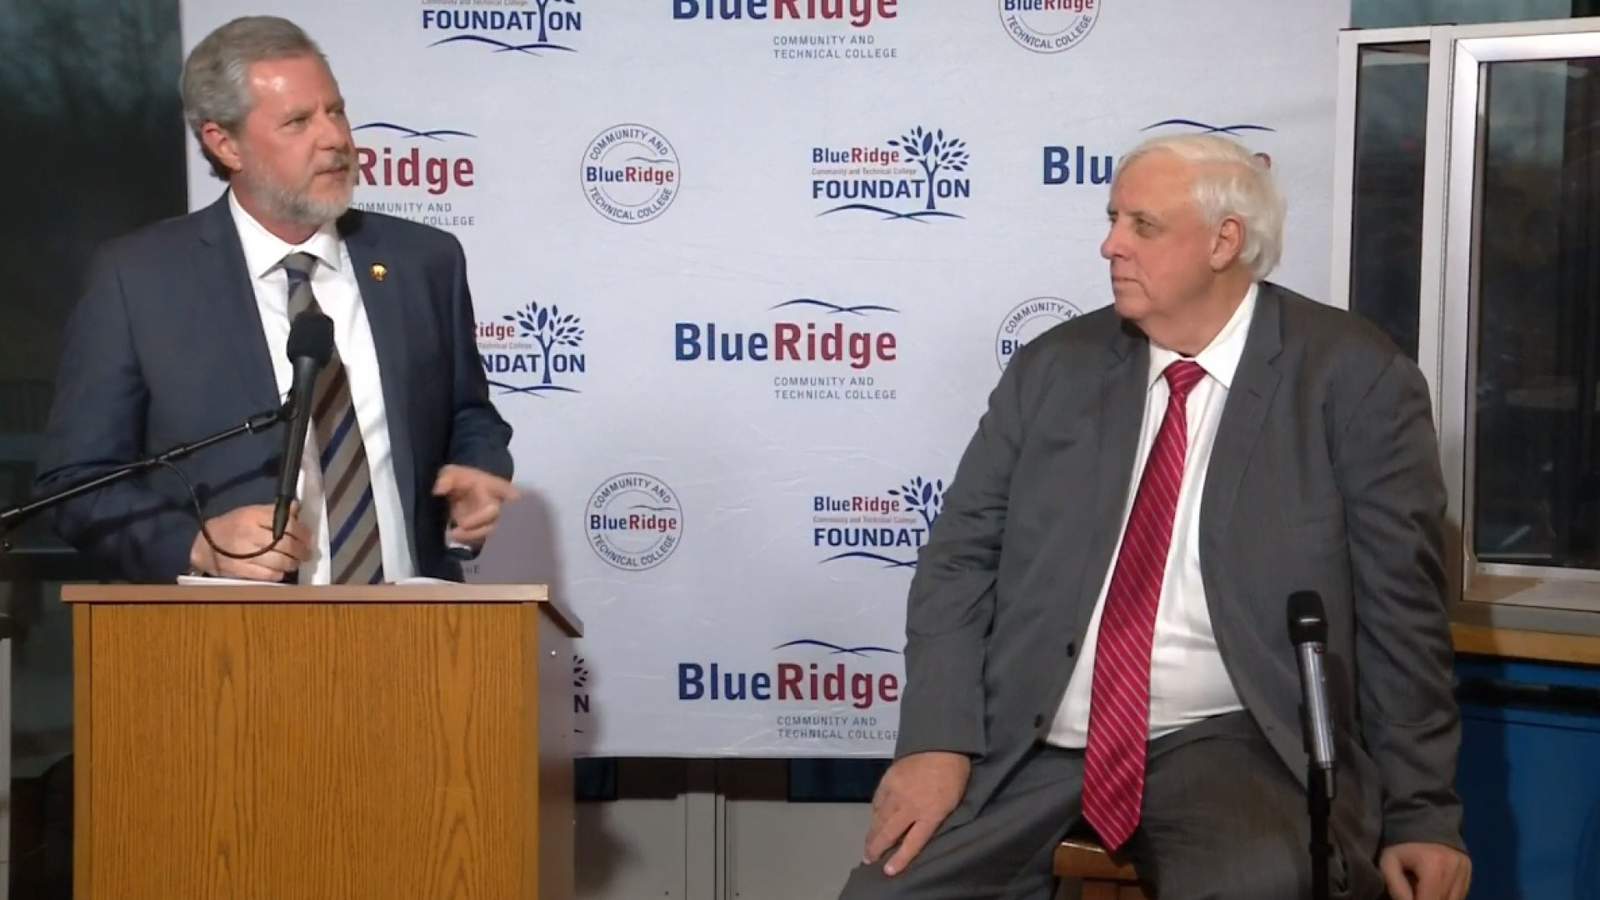 WATCH: Liberty’s Jerry Falwell, W.Va. Gov. Jim Justice support Virginia localities wanting to join West Virginia